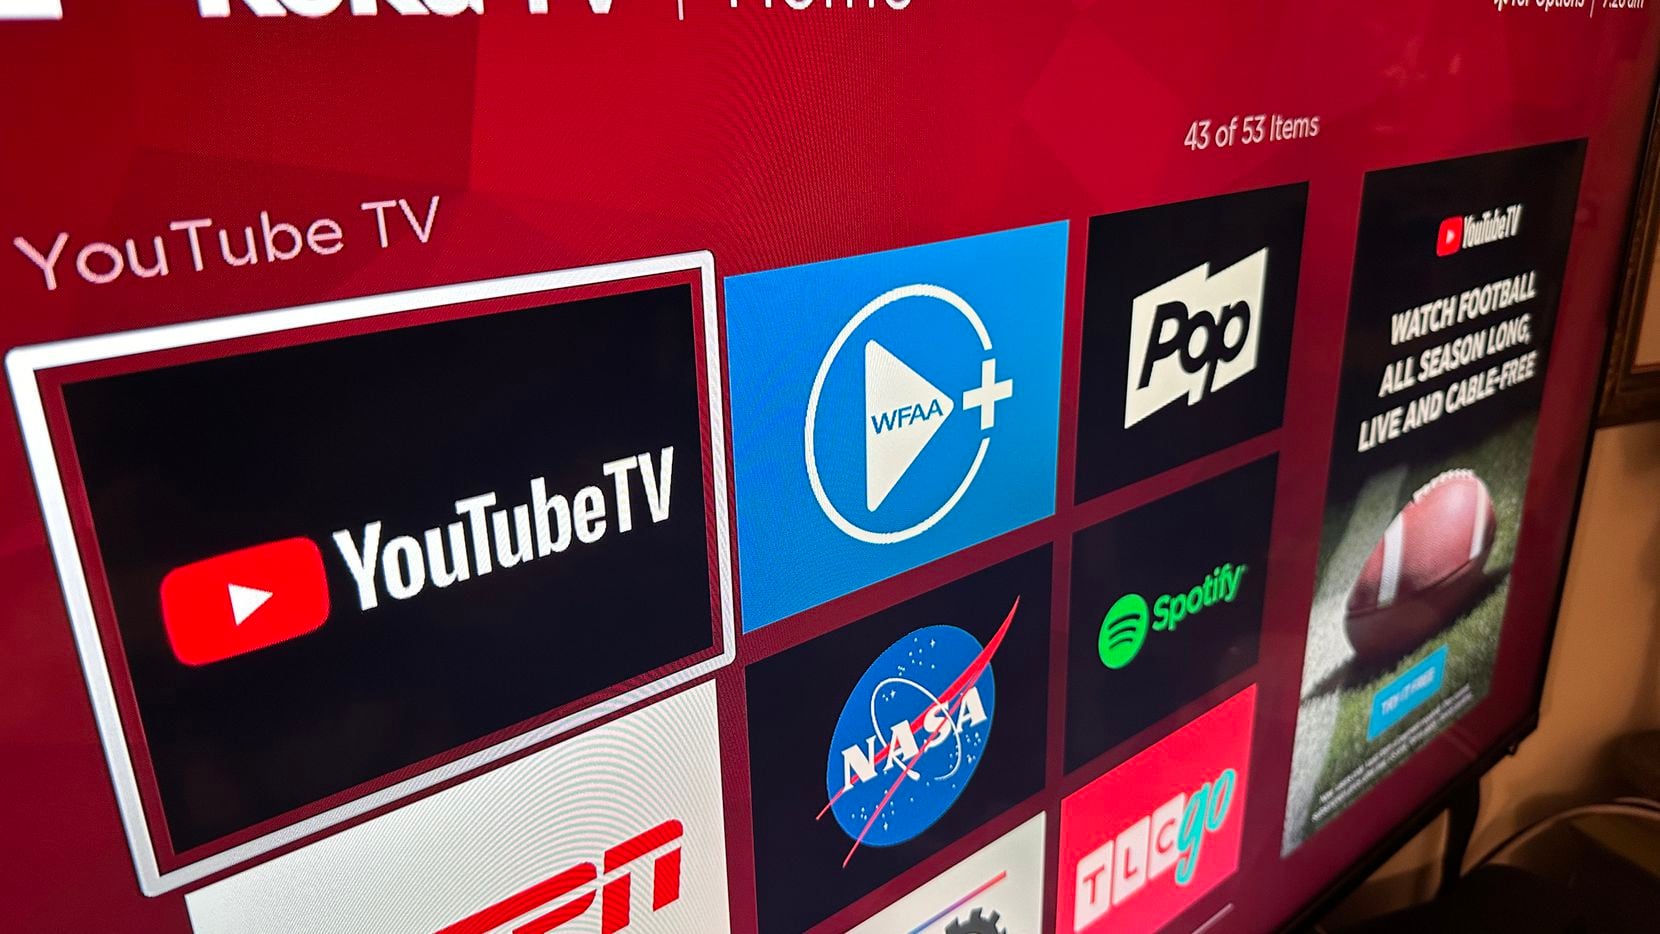 Don't let one ruin your TV streaming